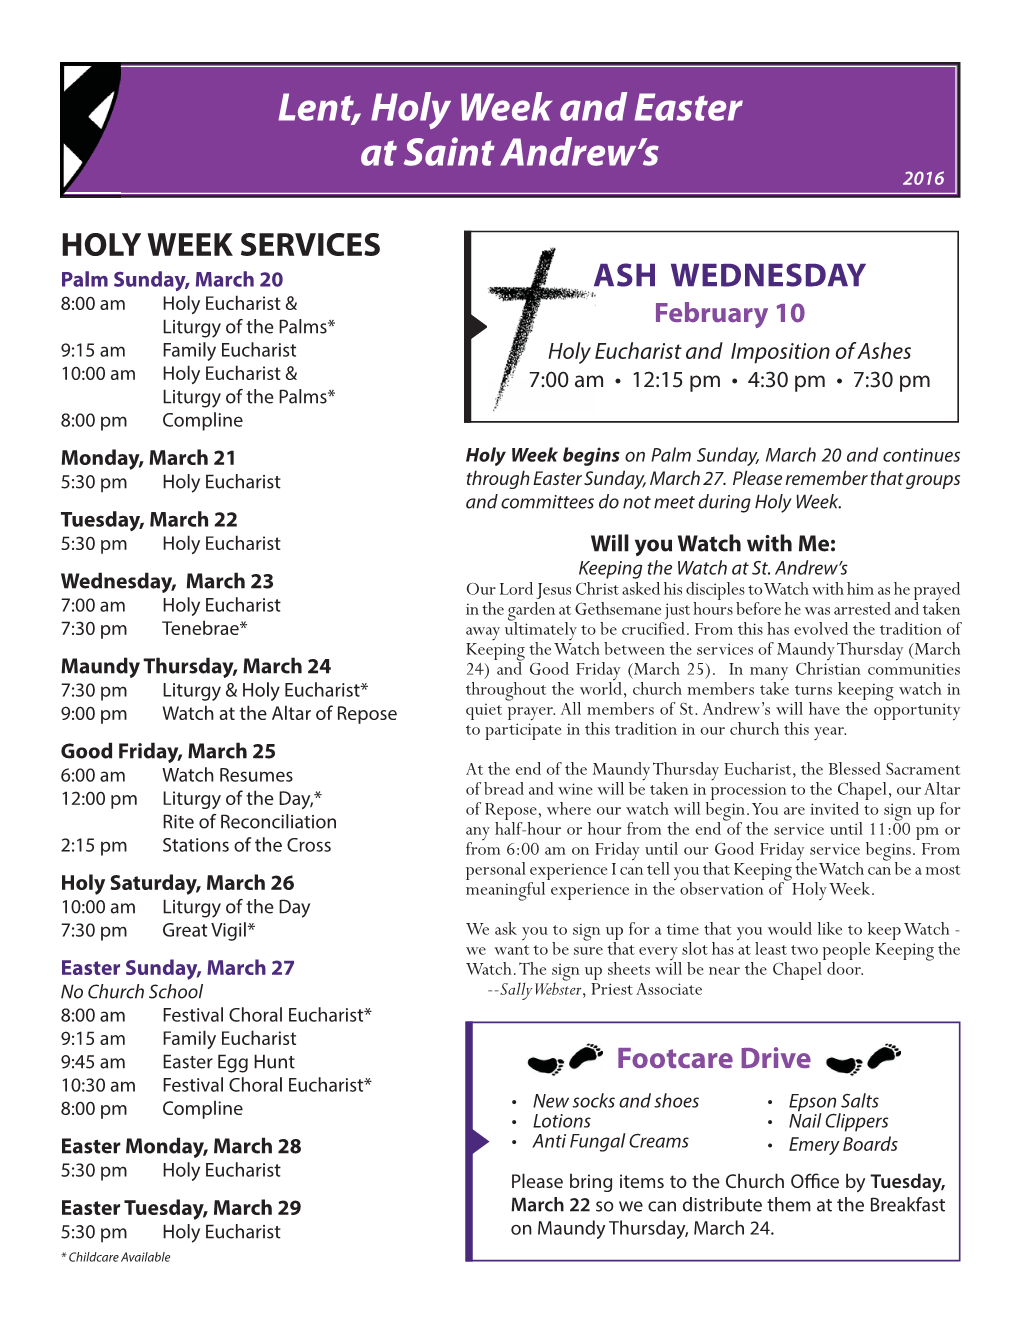 Lent, Holy Week and Easter at Saint Andrew's